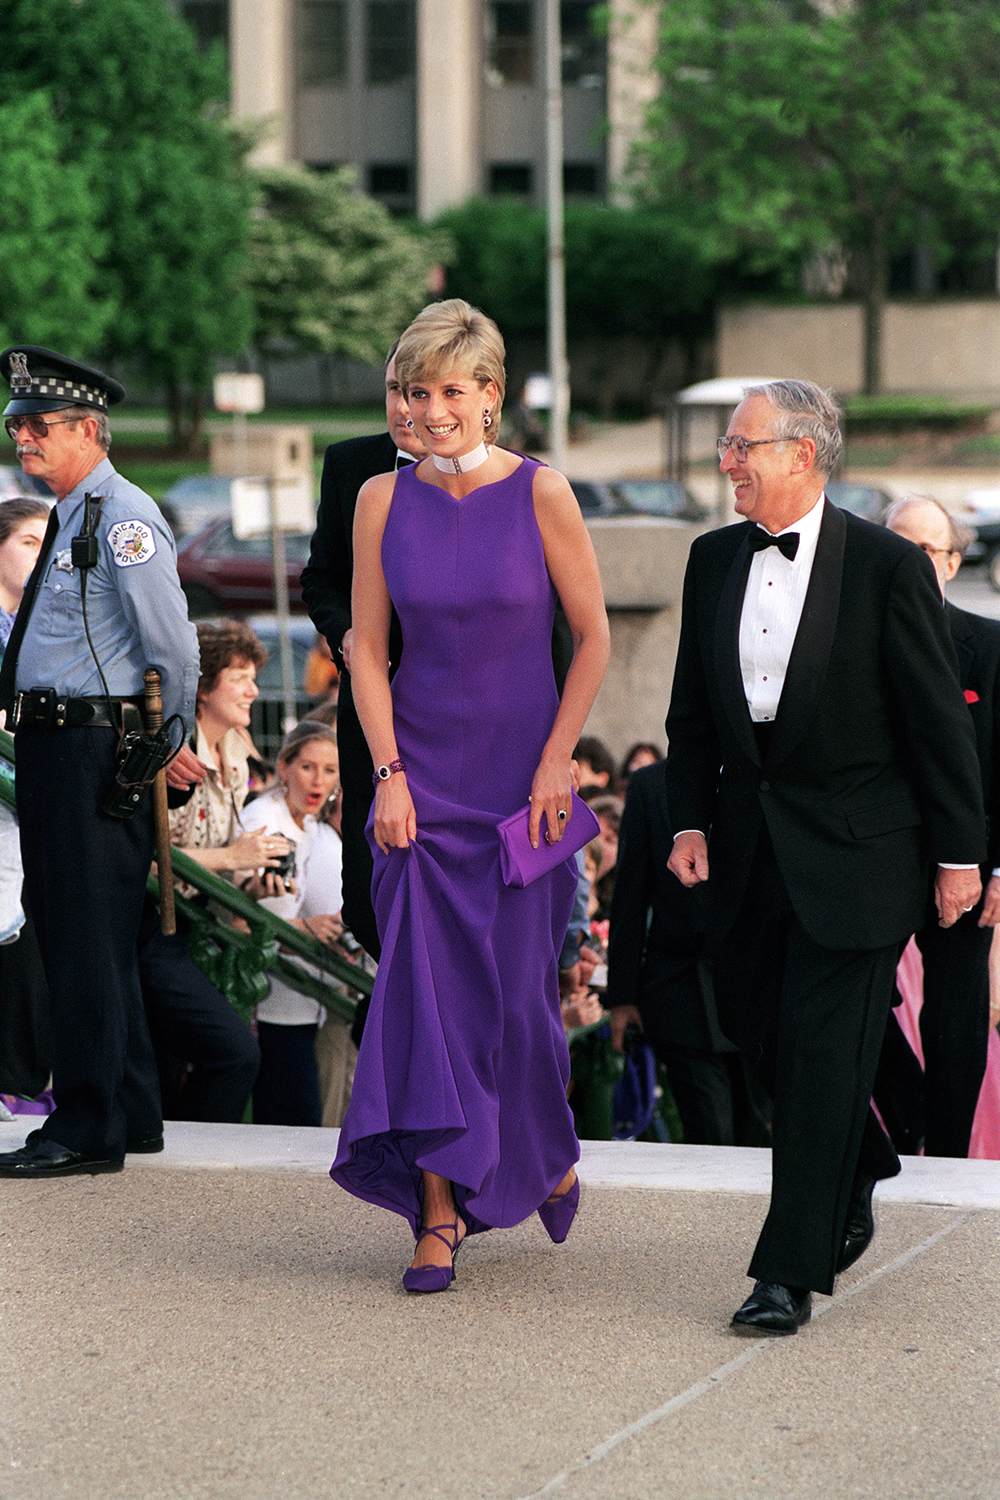 June 5th, 1996 - Princess Diana in Chicago arriving for a gala dinner at the Field Museum Of Natural History.